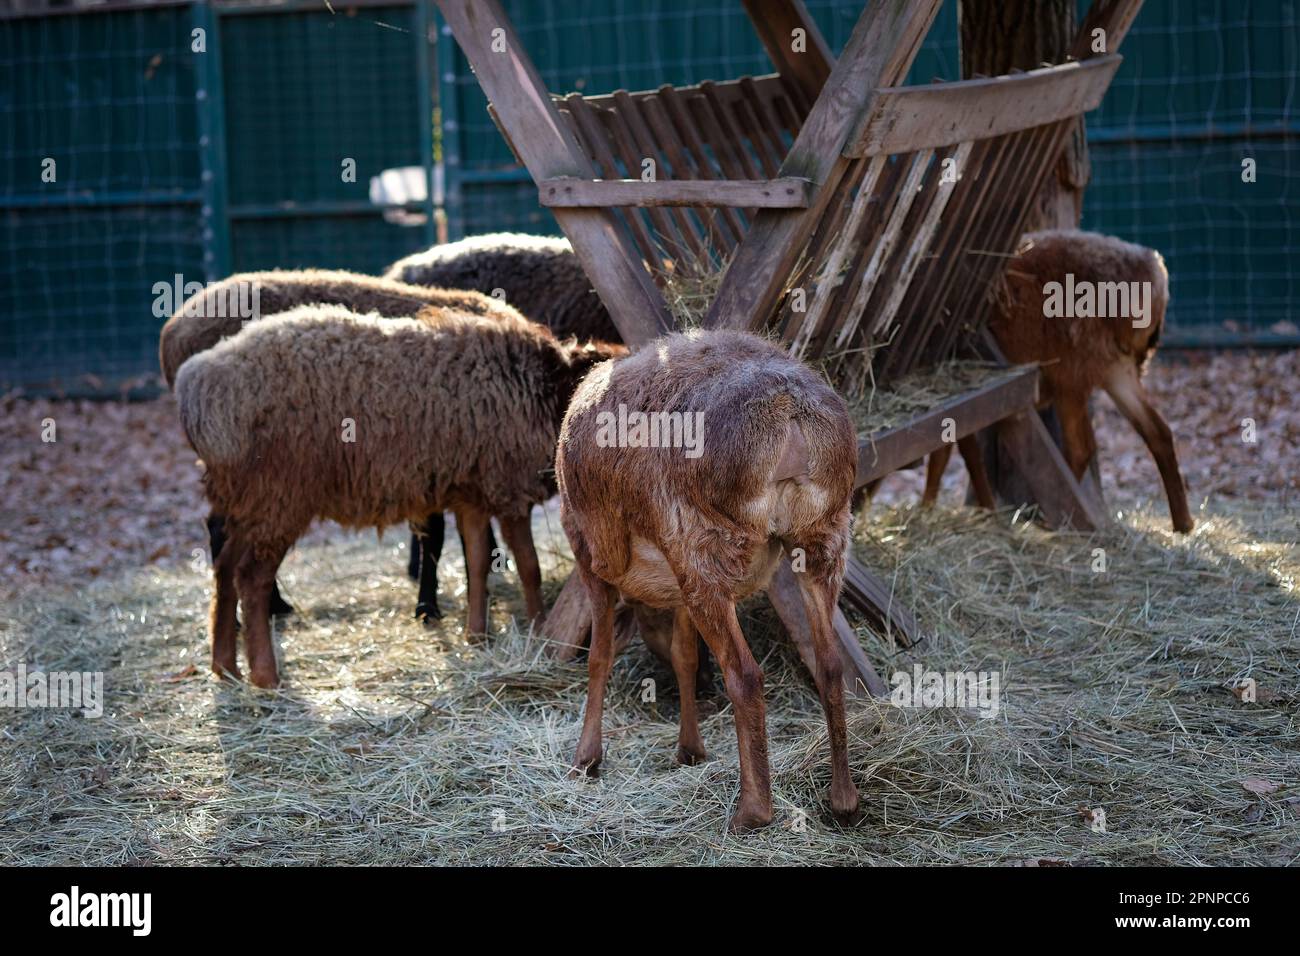 Brown sheep eat hay at the farm. A few brown sheep turned with their asses to the camera bent over to eat. Farm animals. small cattle Stock Photo